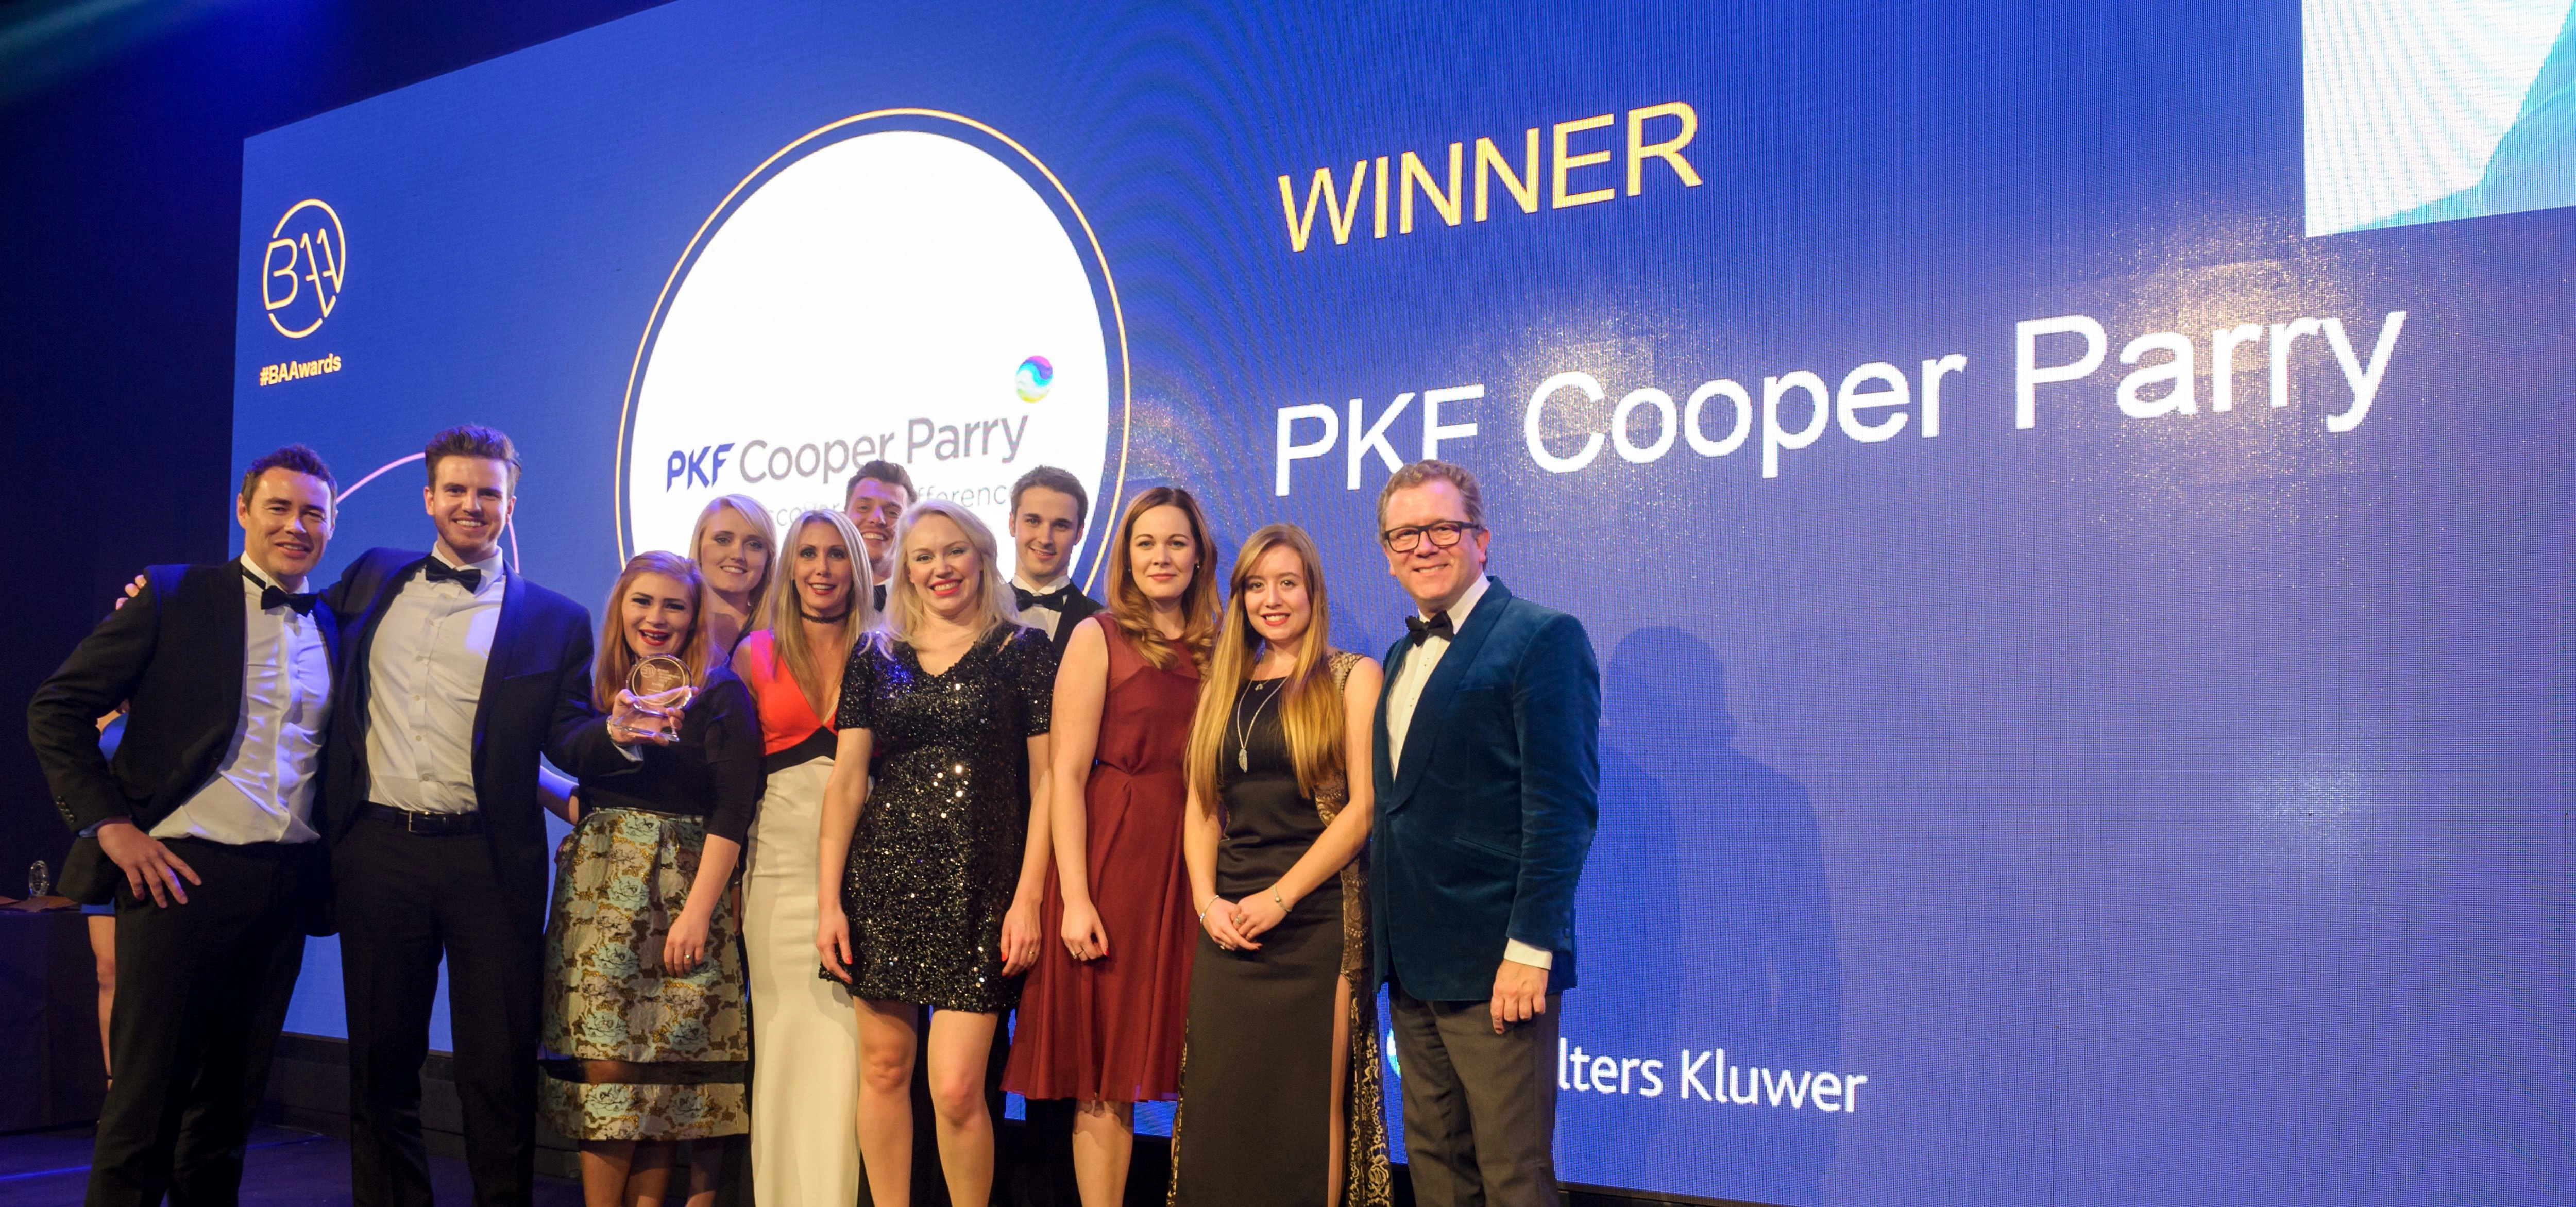 The PKF Cooper Parry team collecting their award from the British Accountancy Awards 2016 host, John